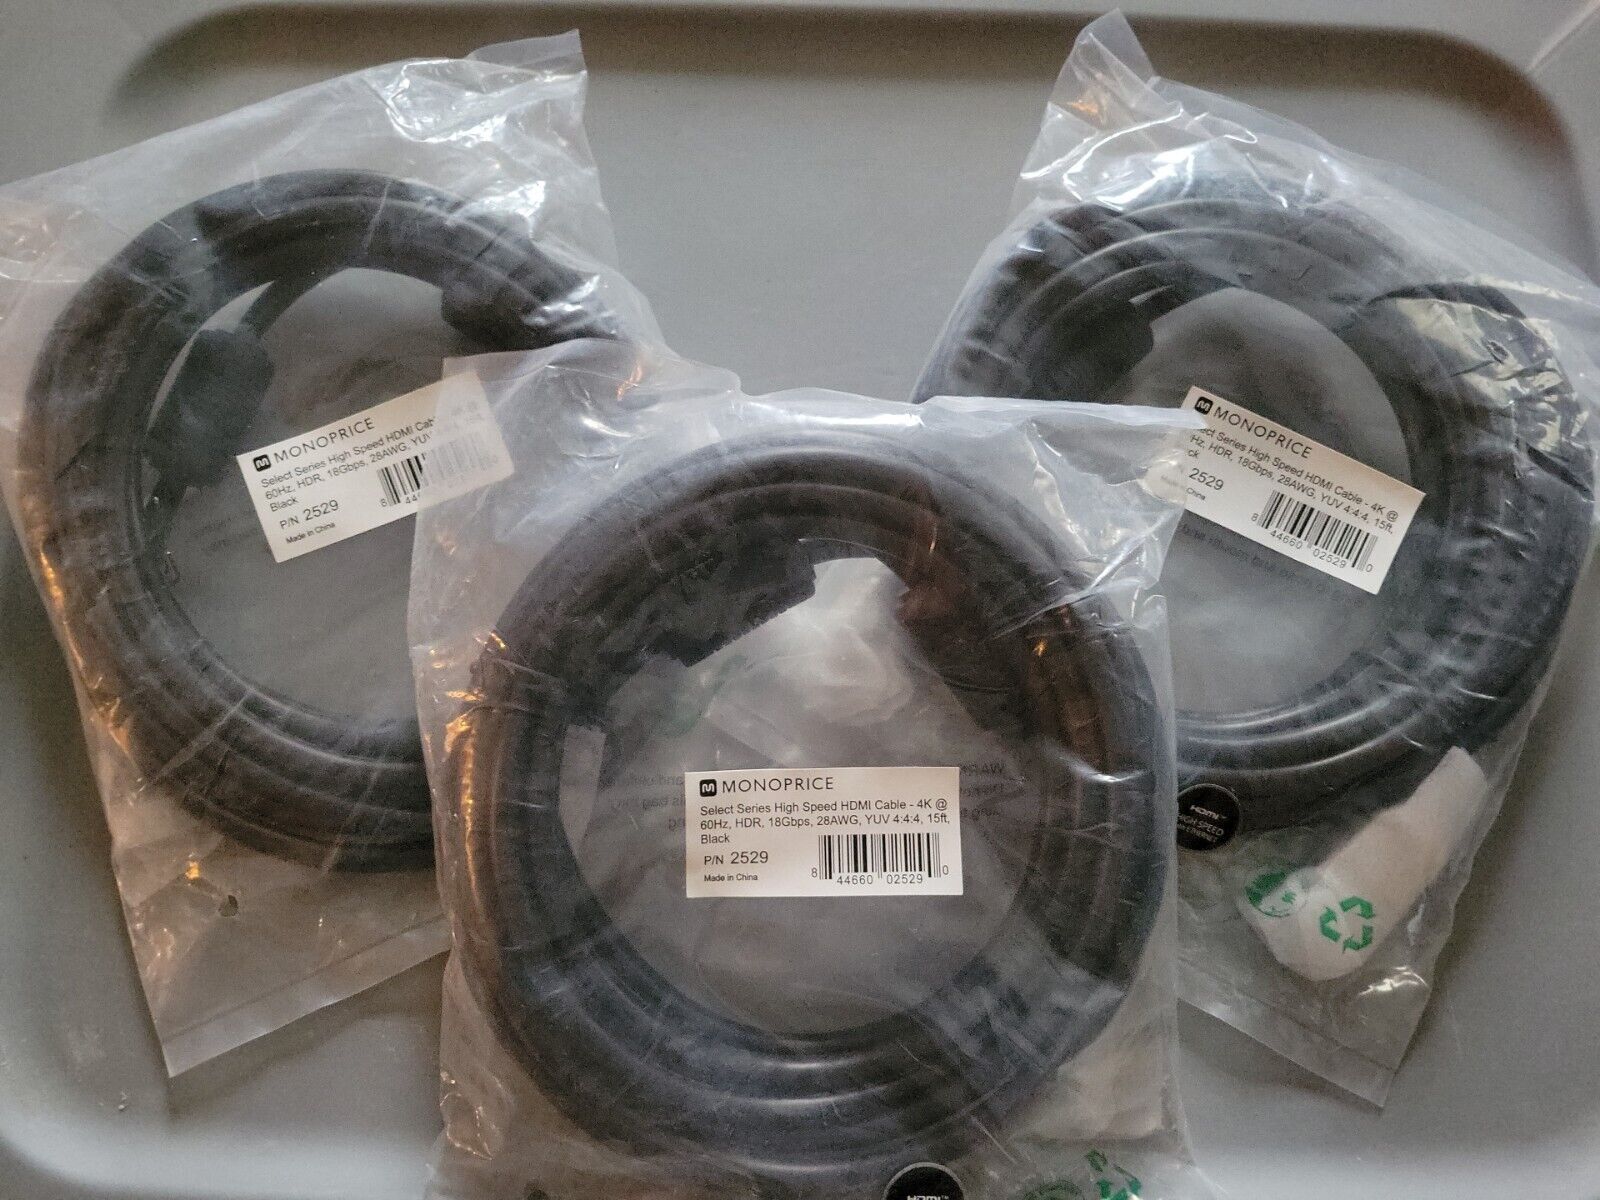 3x New Monoprice Select Series 2529 15' HDMI Audio/Video Cable Black 102529